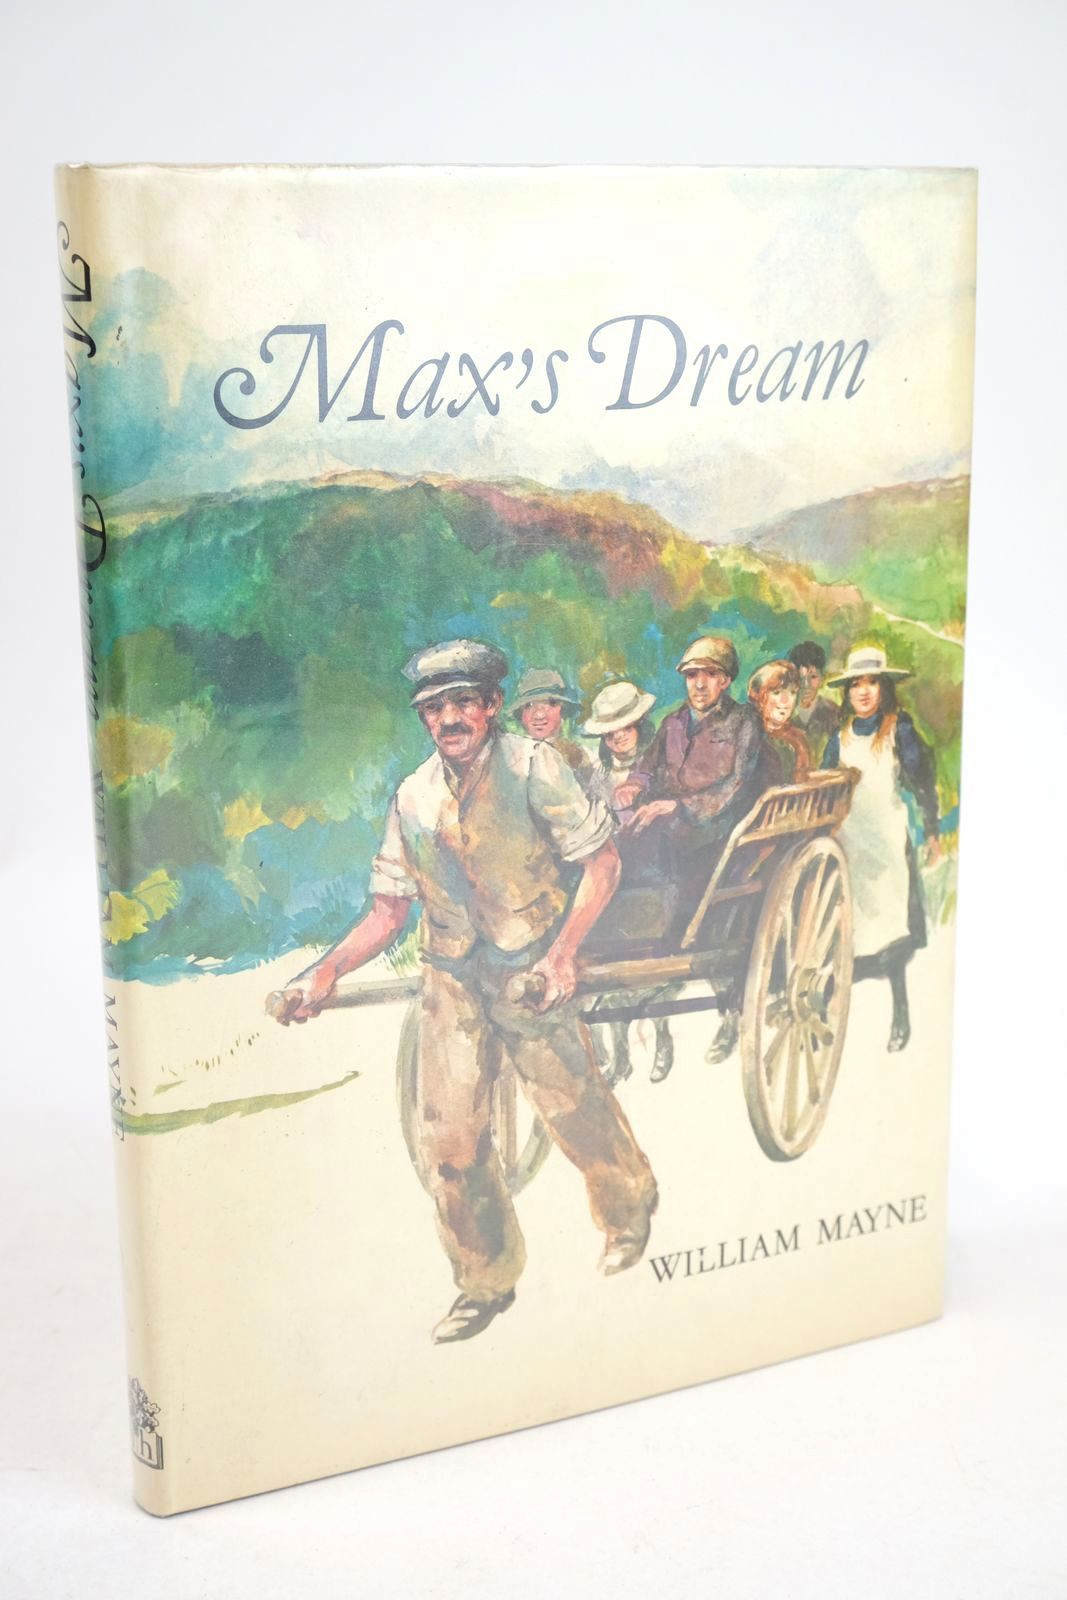 Photo of MAX'S DREAM written by Mayne, William illustrated by Acs, Laszlo published by Hamish Hamilton (STOCK CODE: 1325464)  for sale by Stella & Rose's Books